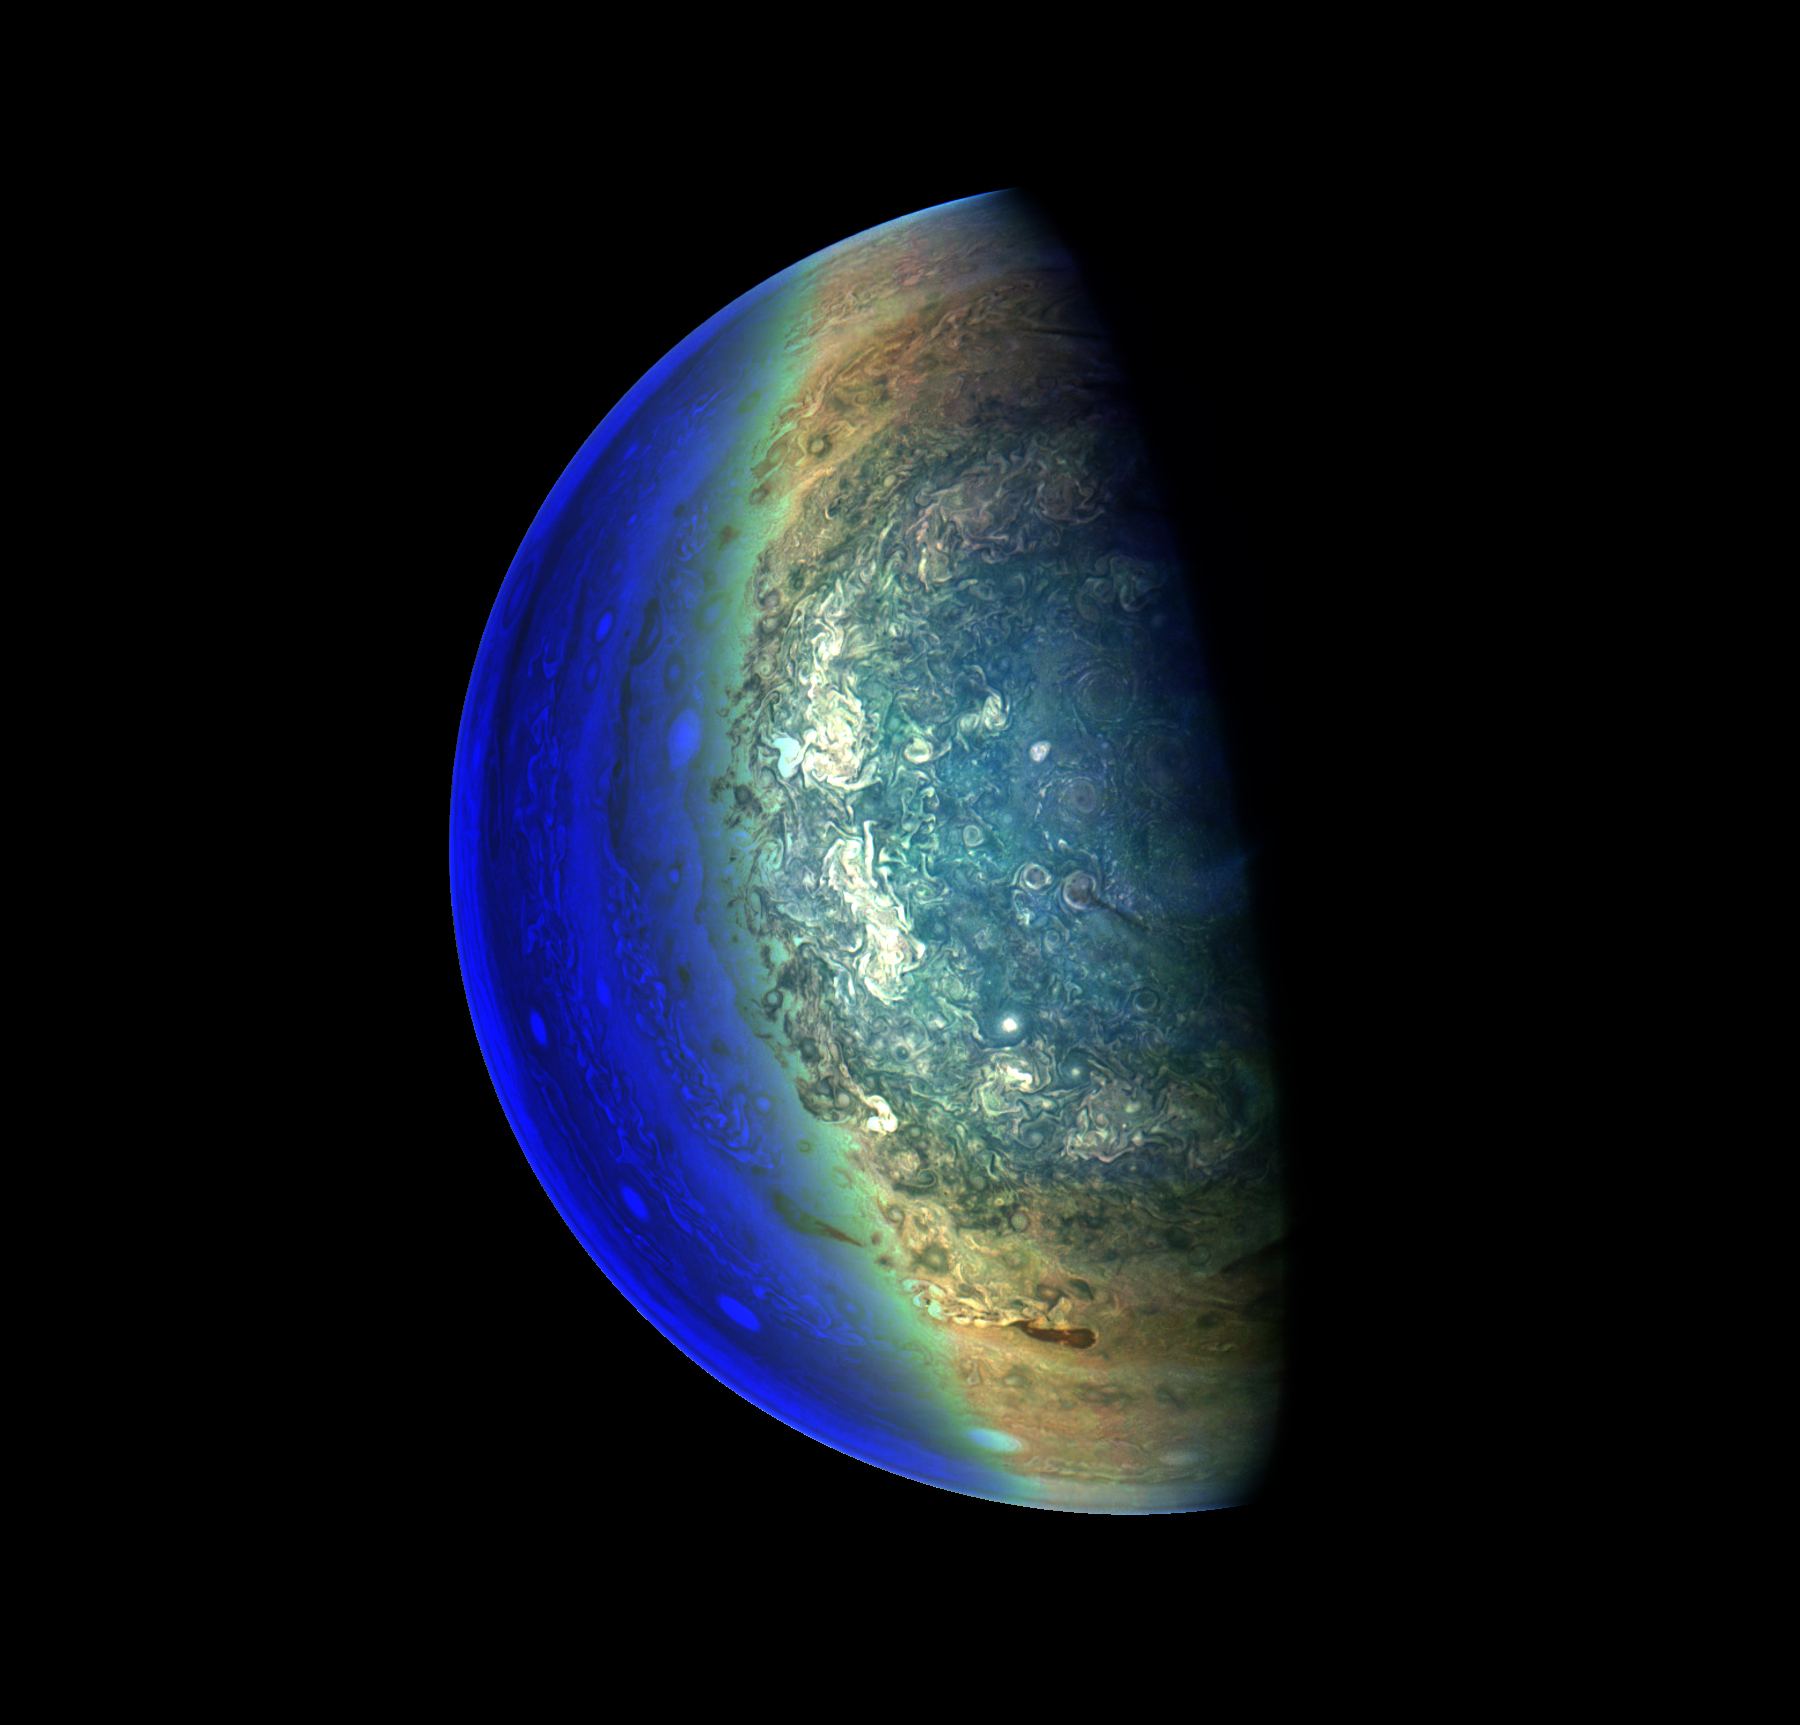 Colorful, enhanced image of Jupiter's swirling clouds.